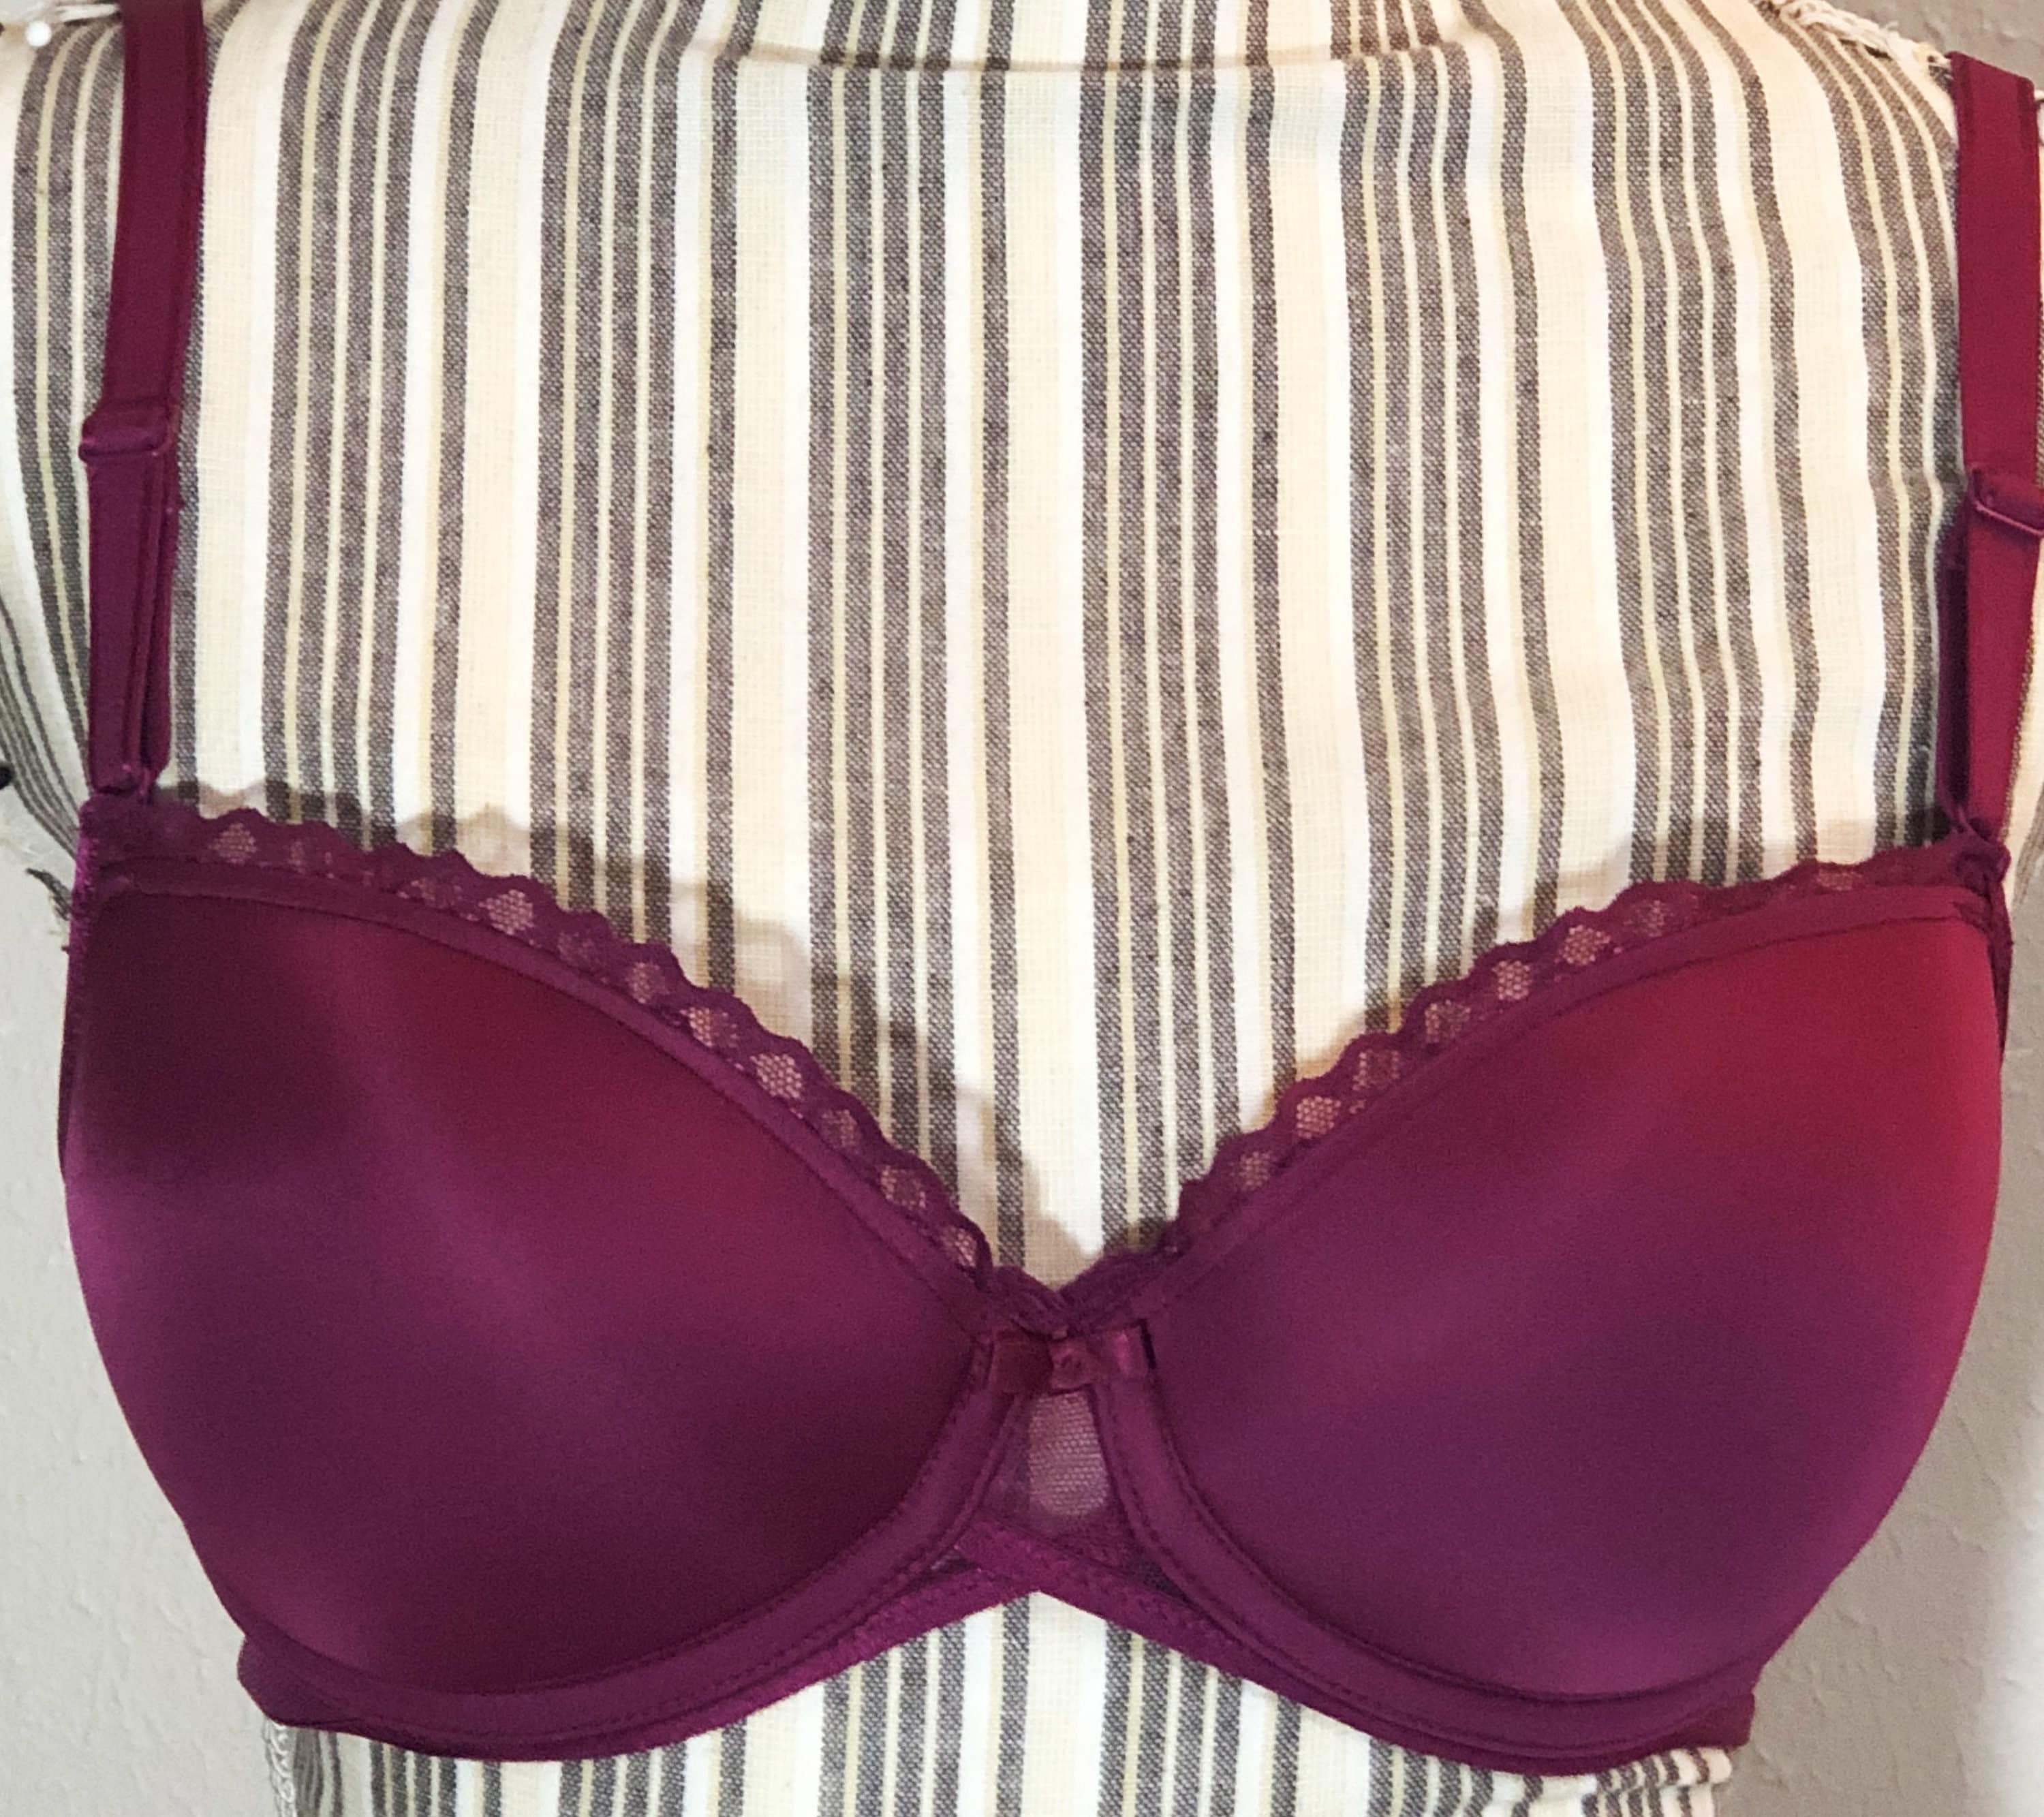 Lot of 6 Brand New Vintage Push up Bras Available in Sizes 32b